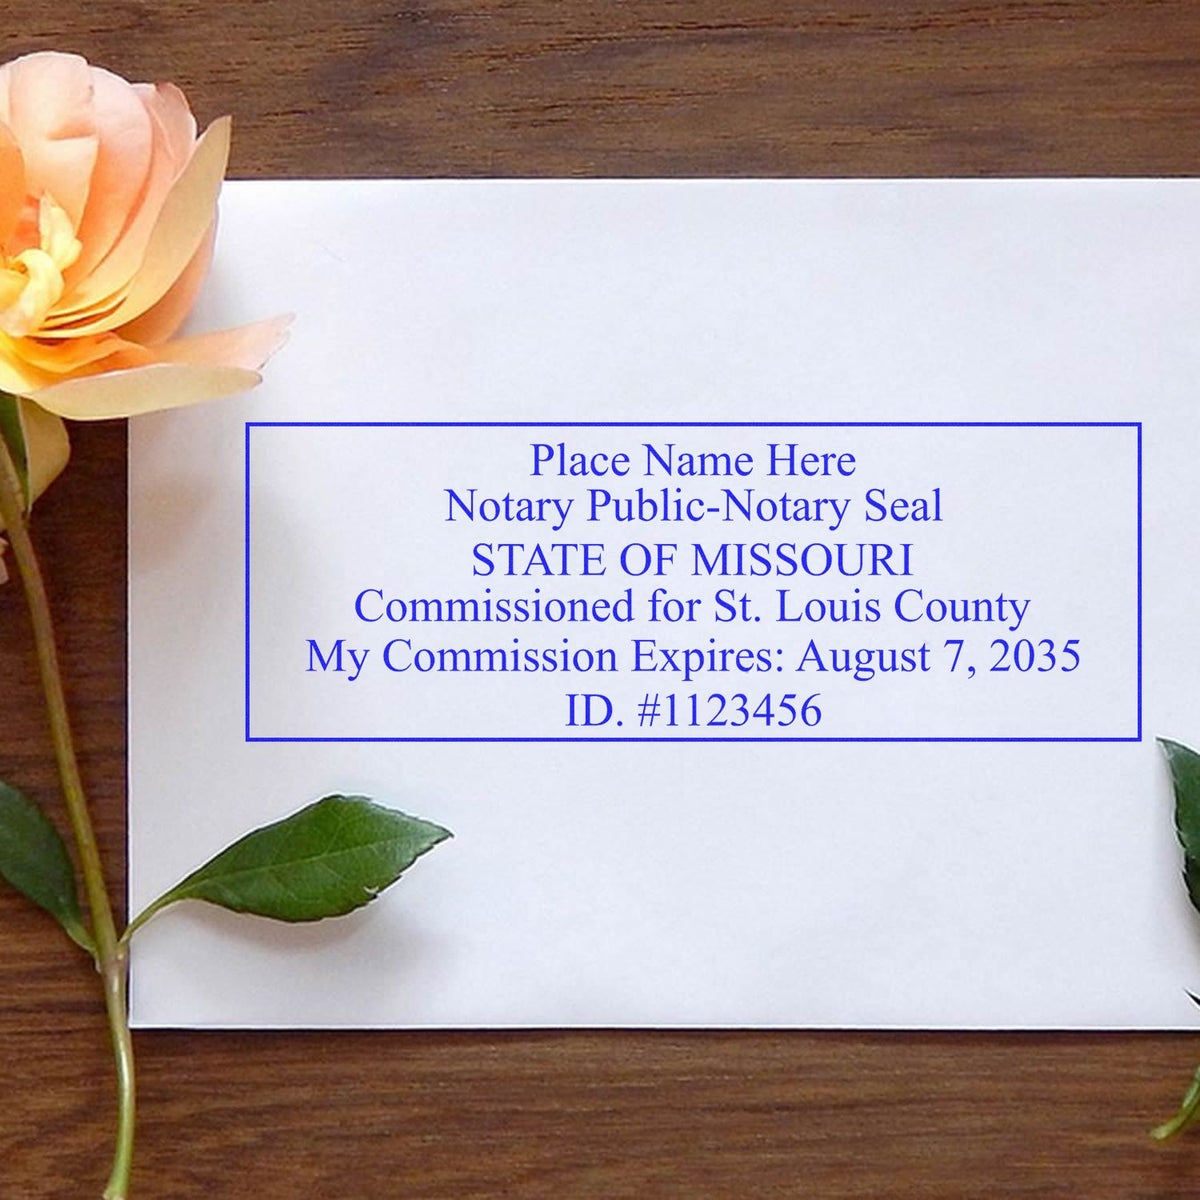 This paper is stamped with a sample imprint of the Slim Pre-Inked Rectangular Notary Stamp for Missouri, signifying its quality and reliability.